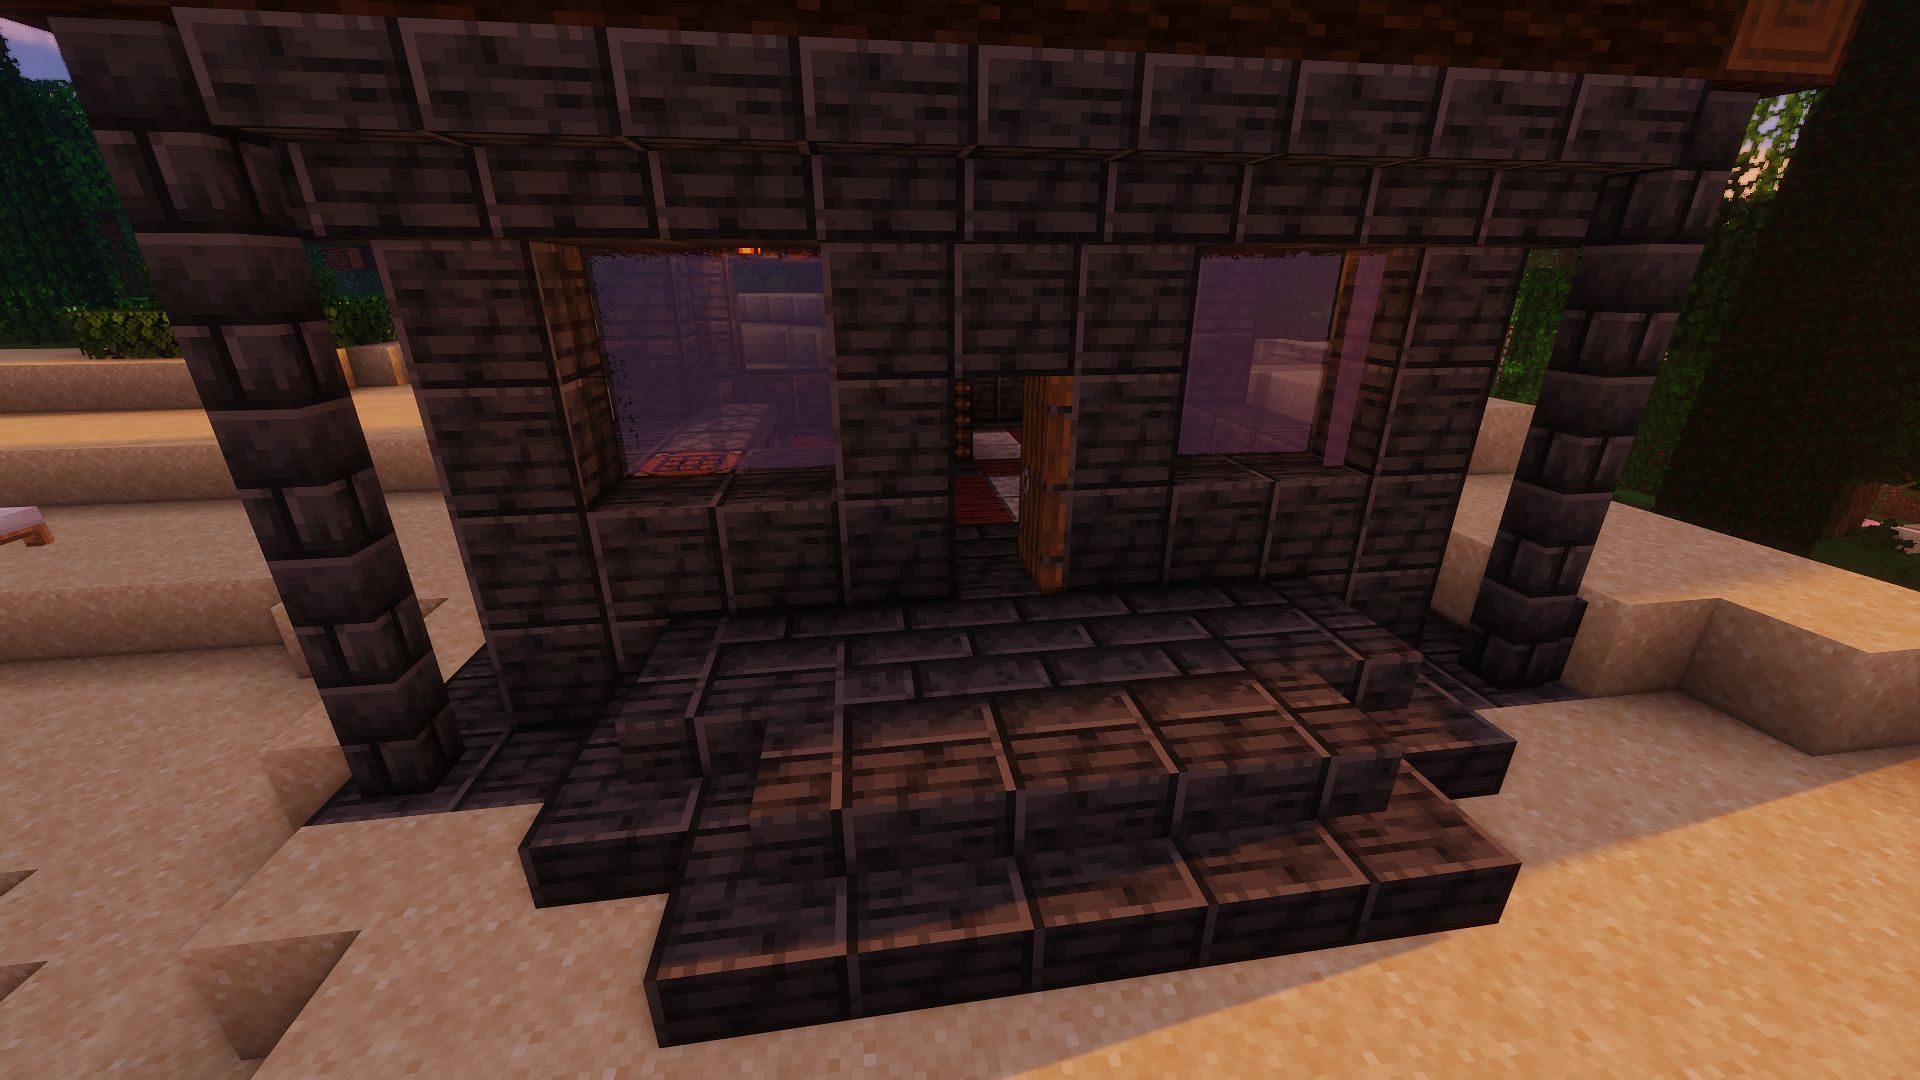 Stairs as a porch as underneath the roof&#039;s overhang (Image via Minecraft)